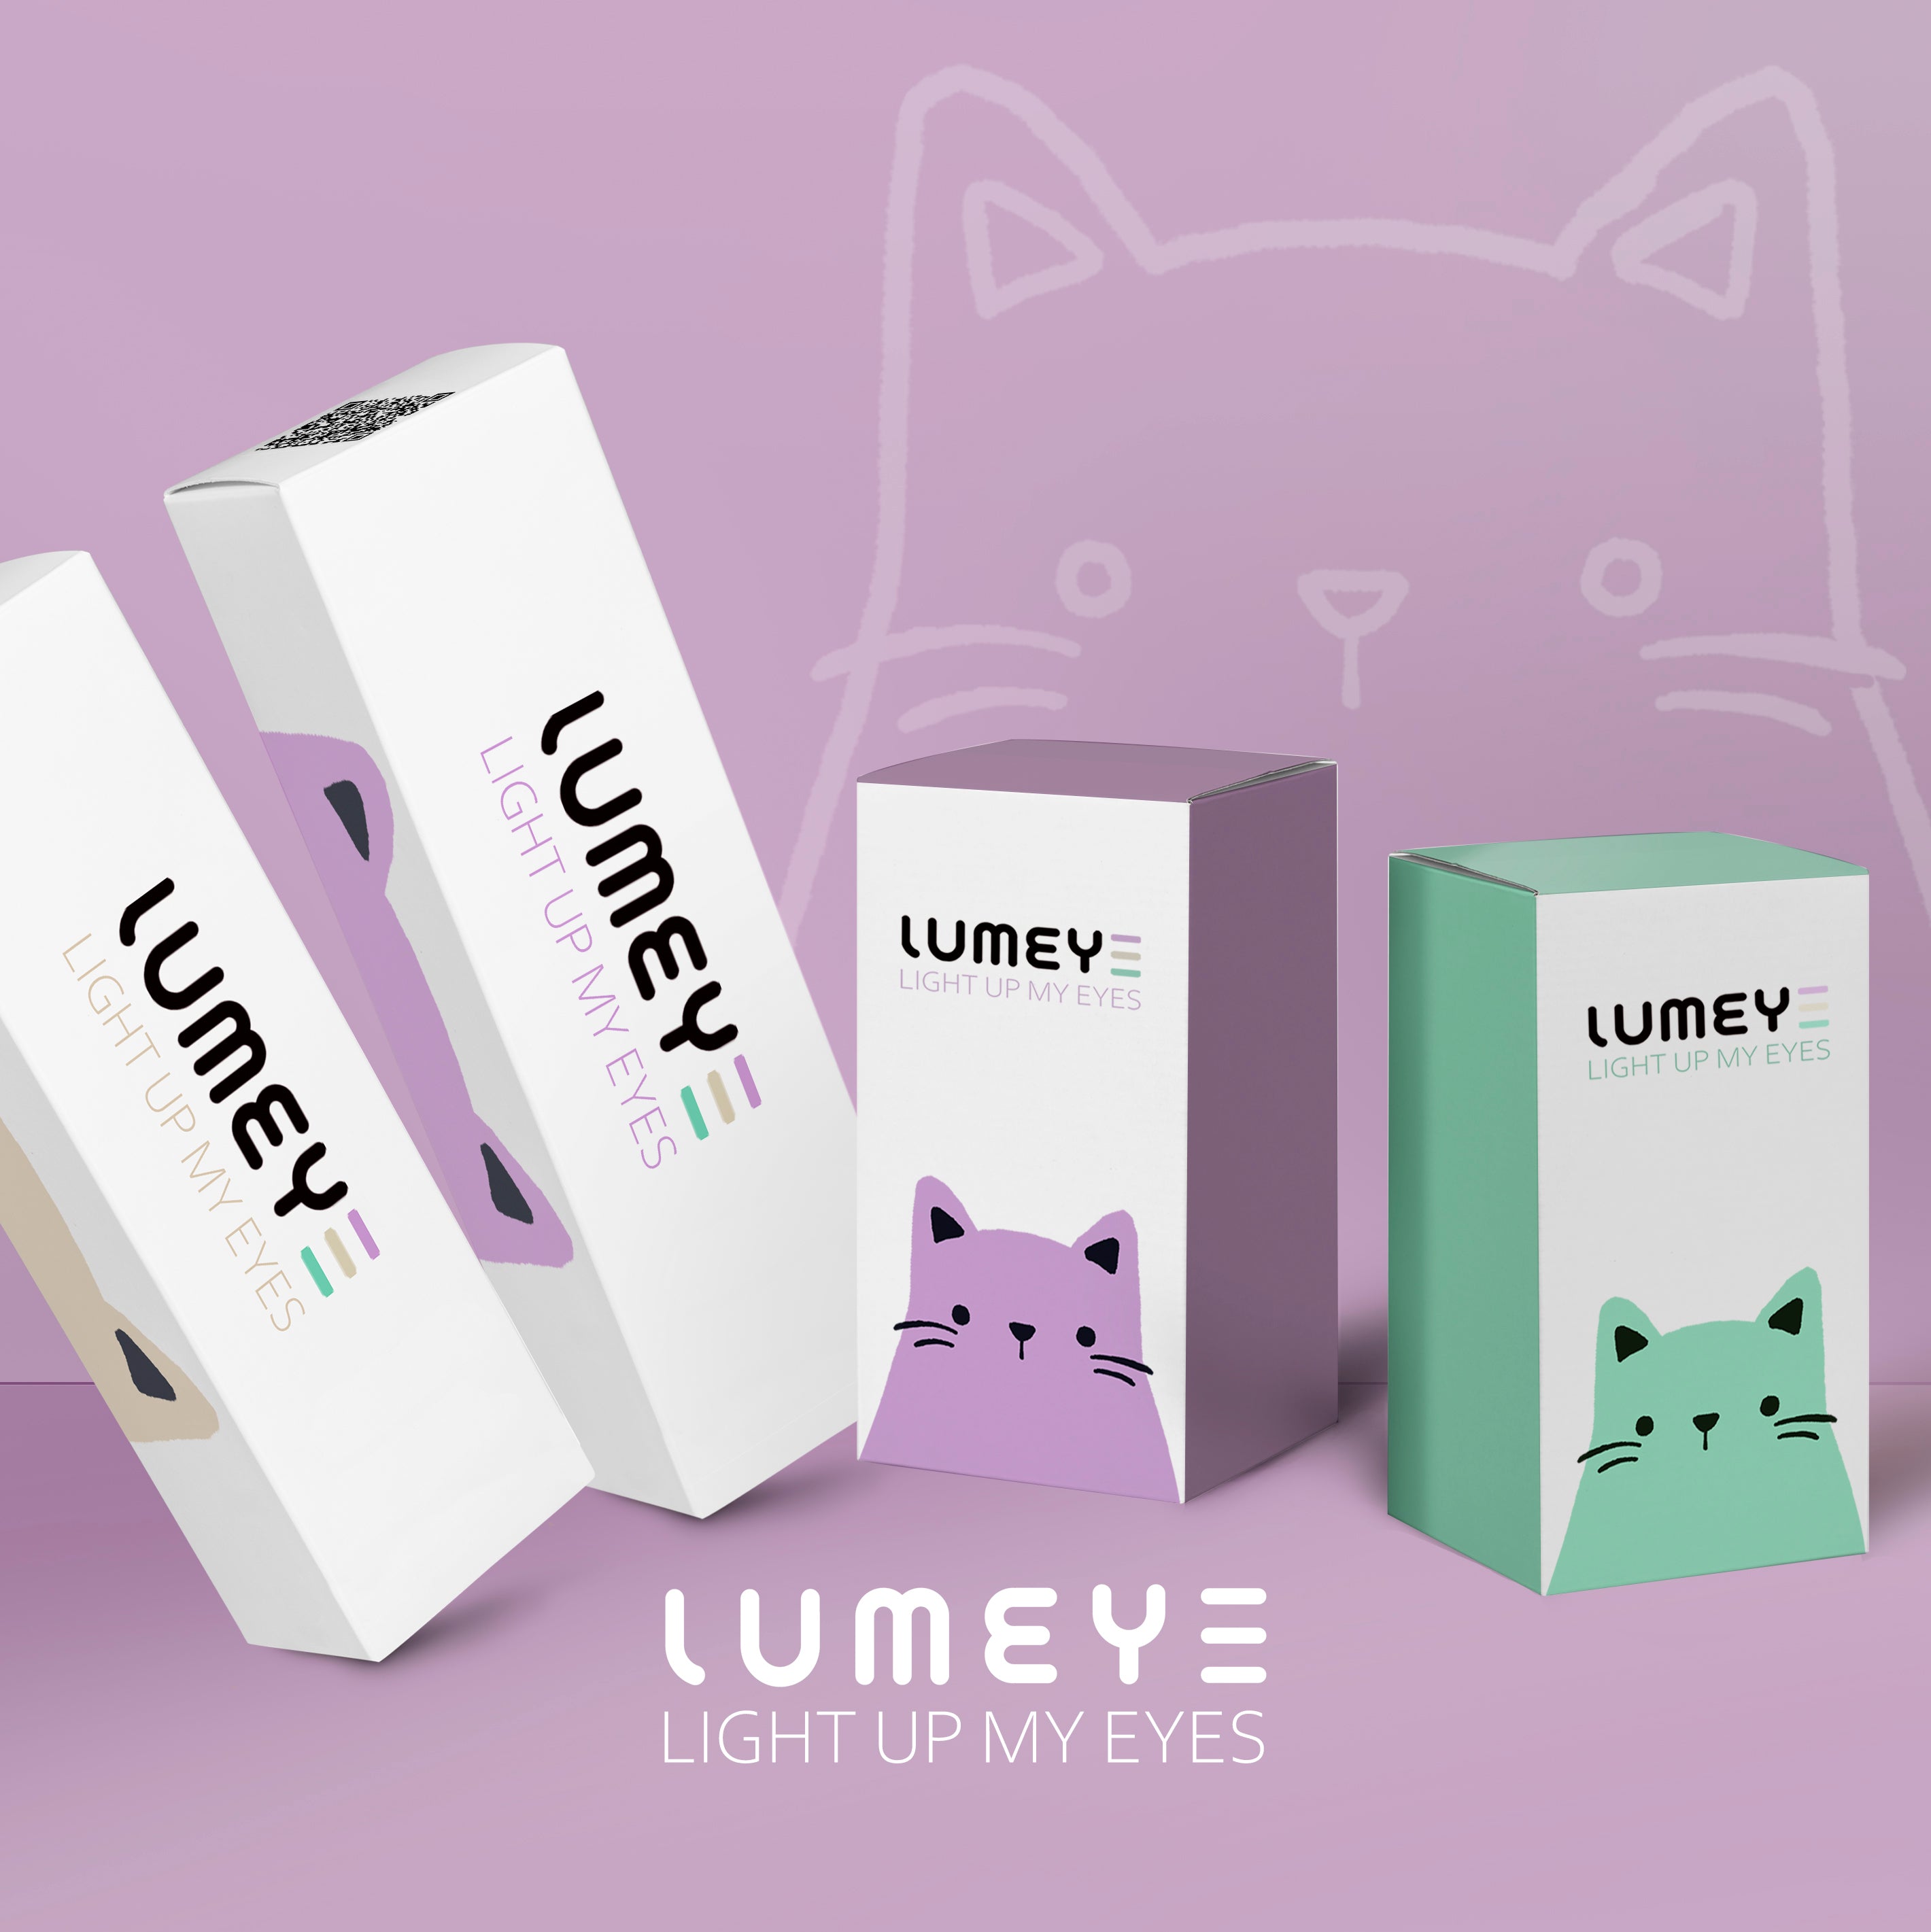 Best COLORED CONTACTS - LUMEYE Crazy Blue Colored Contact Lenses - LUMEYE